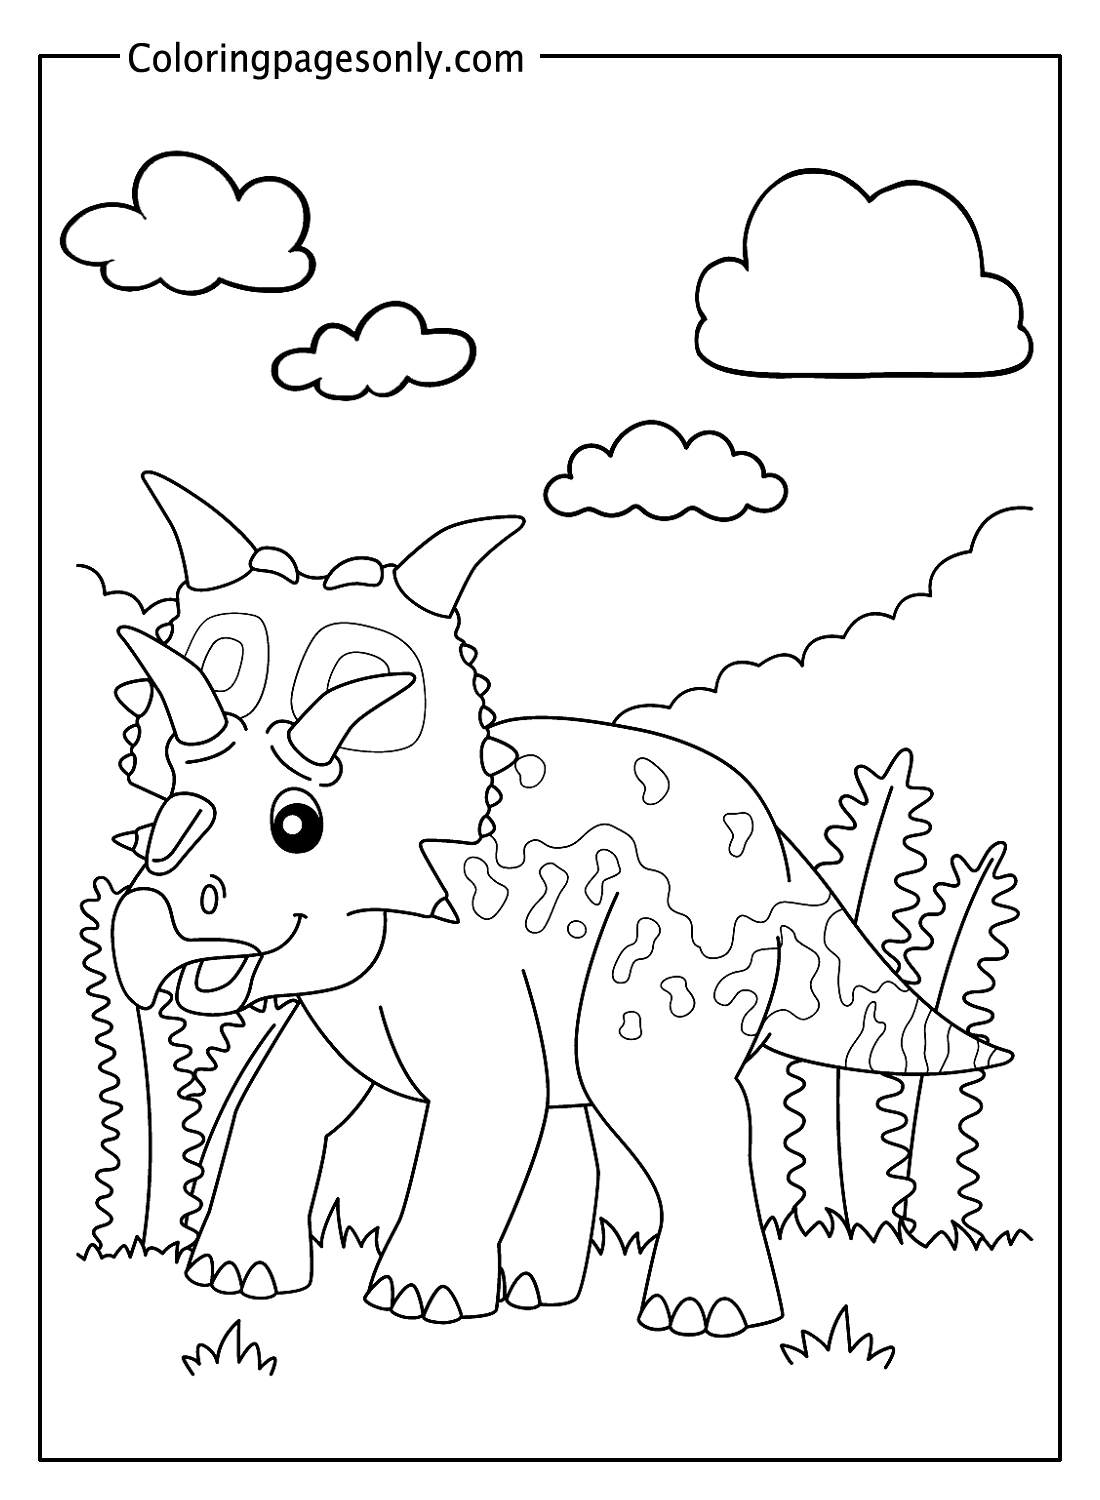 Dinosaurs On A Beautiful Day Coloring Pages